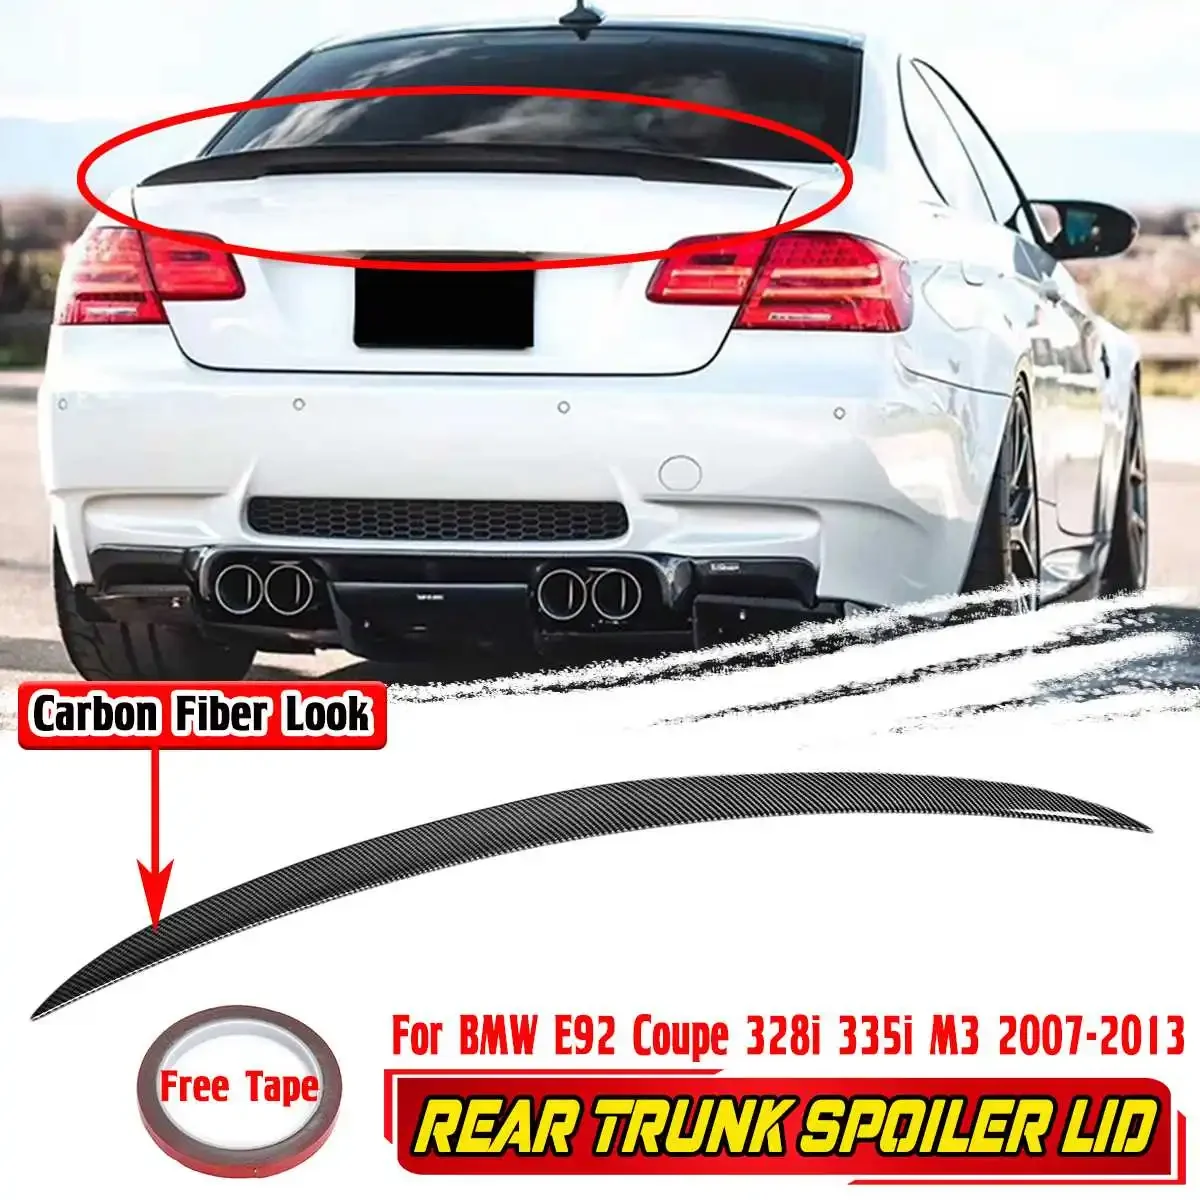 

Carbon Fiber Look ABS Car Rear Trunk Spoiler Lid Rear Extension Spoiler Wing Protector For BMW E92 Coupe 328i 335i M3 2007-2013